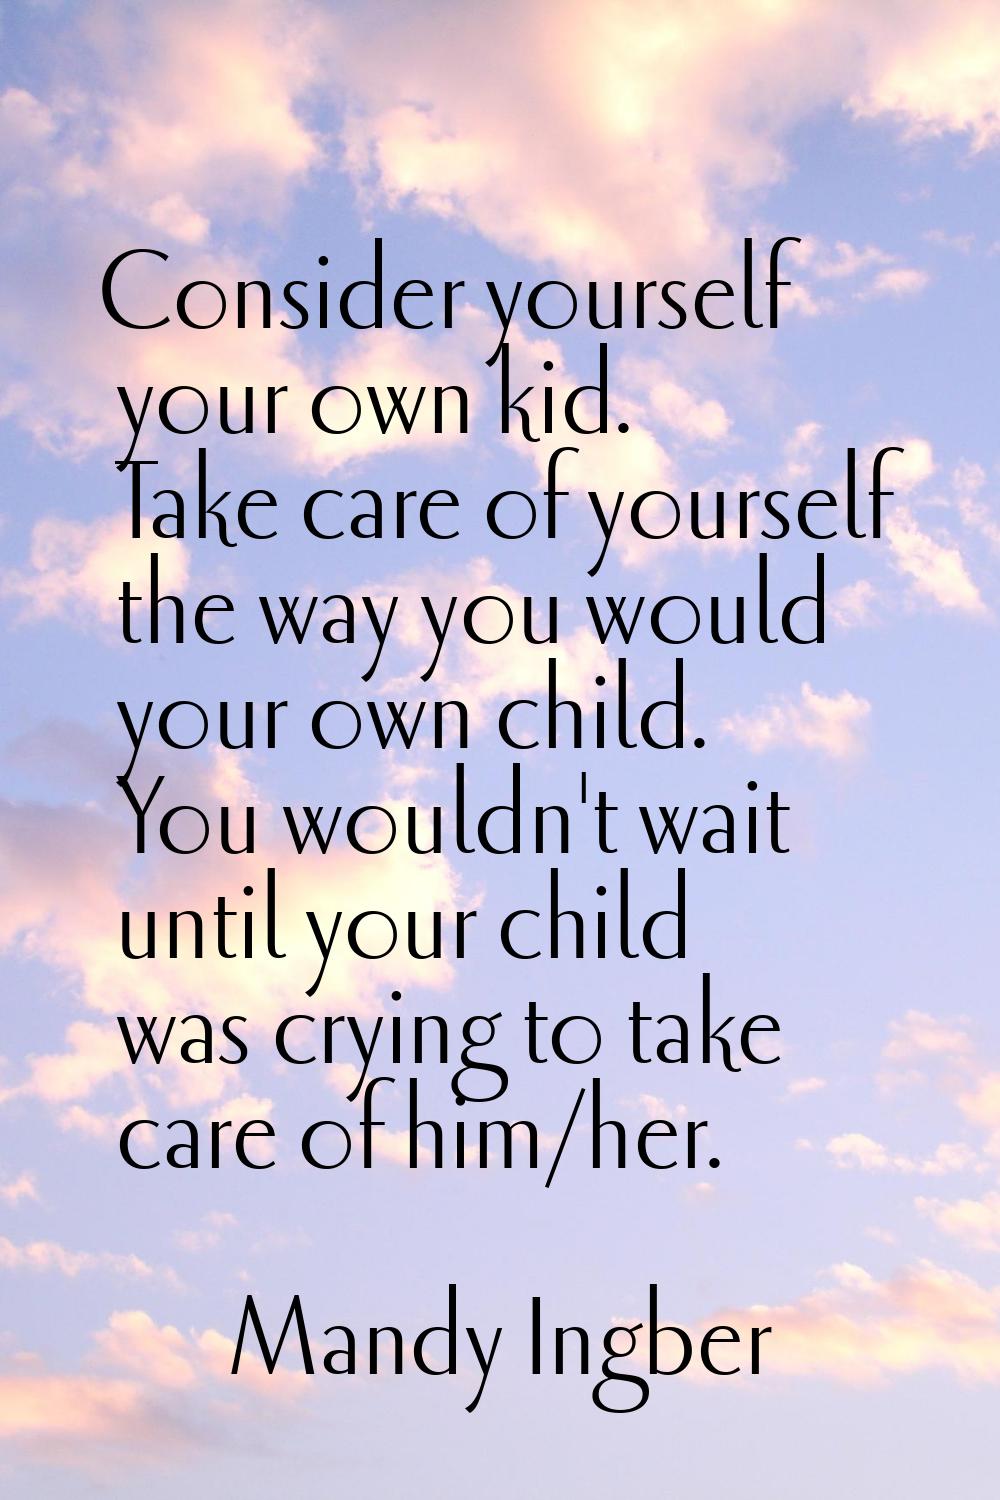 Consider yourself your own kid. Take care of yourself the way you would your own child. You wouldn'